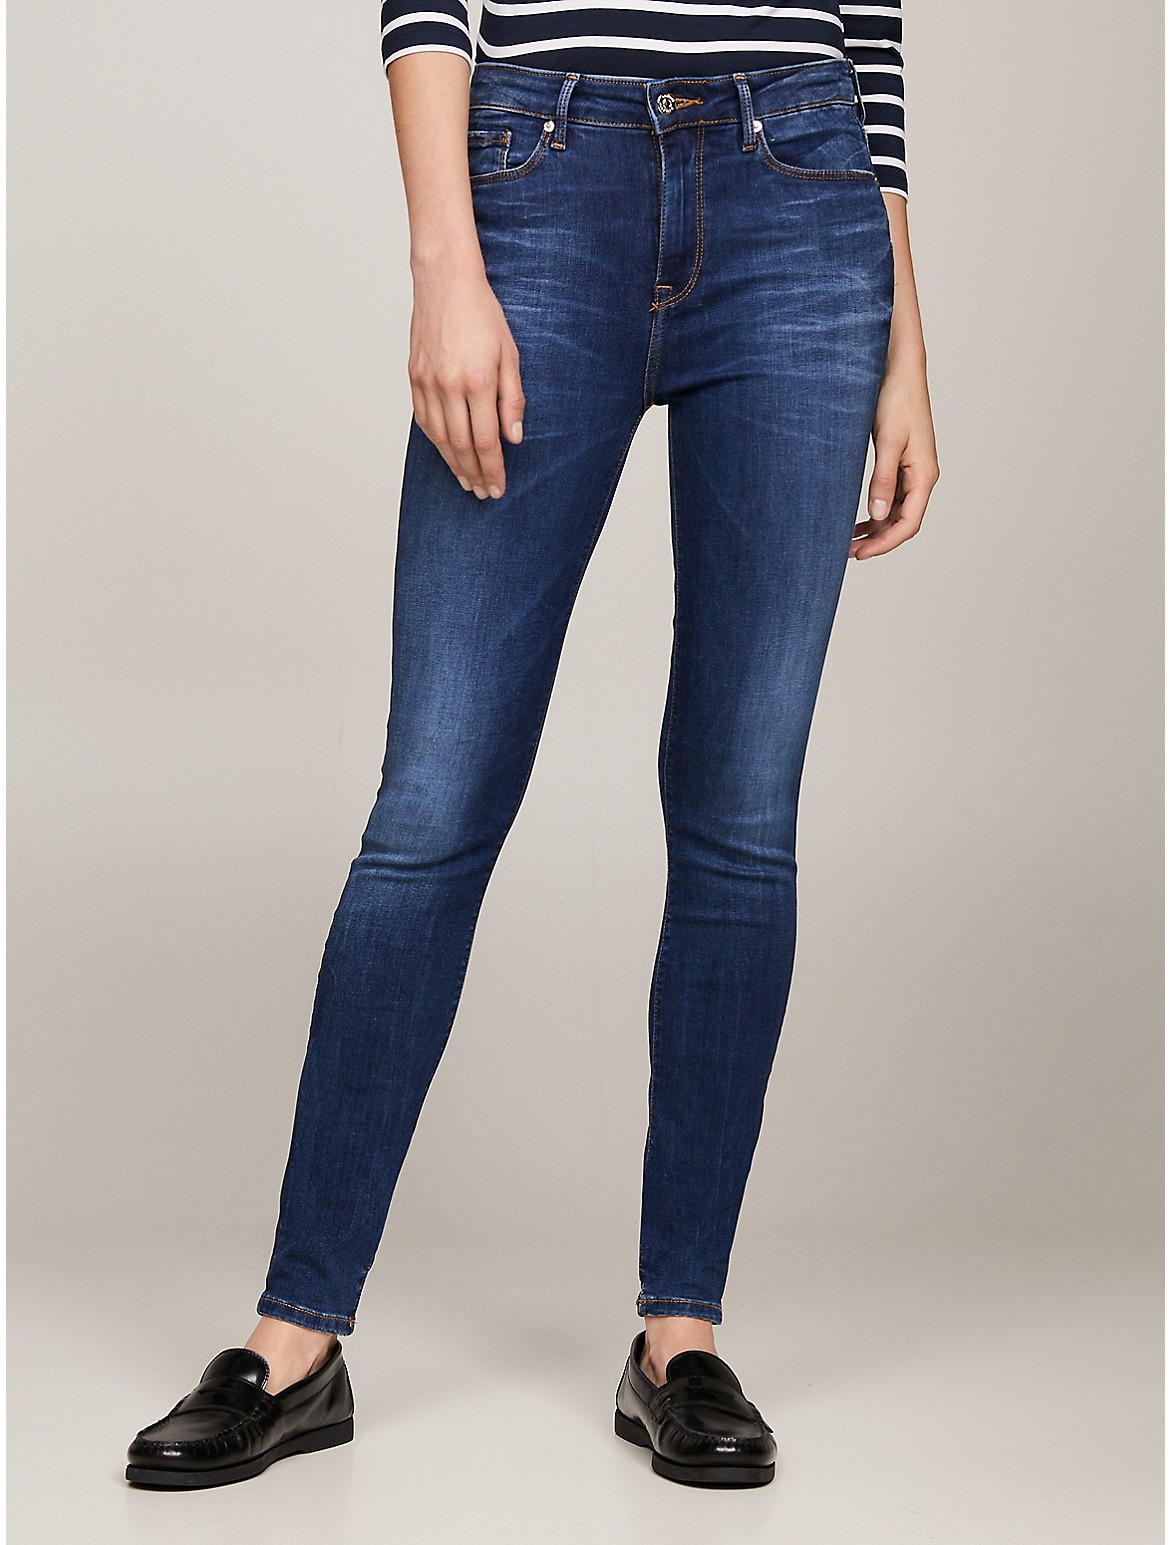 | Women HILFIGER for Jeans TOMMY ModeSens